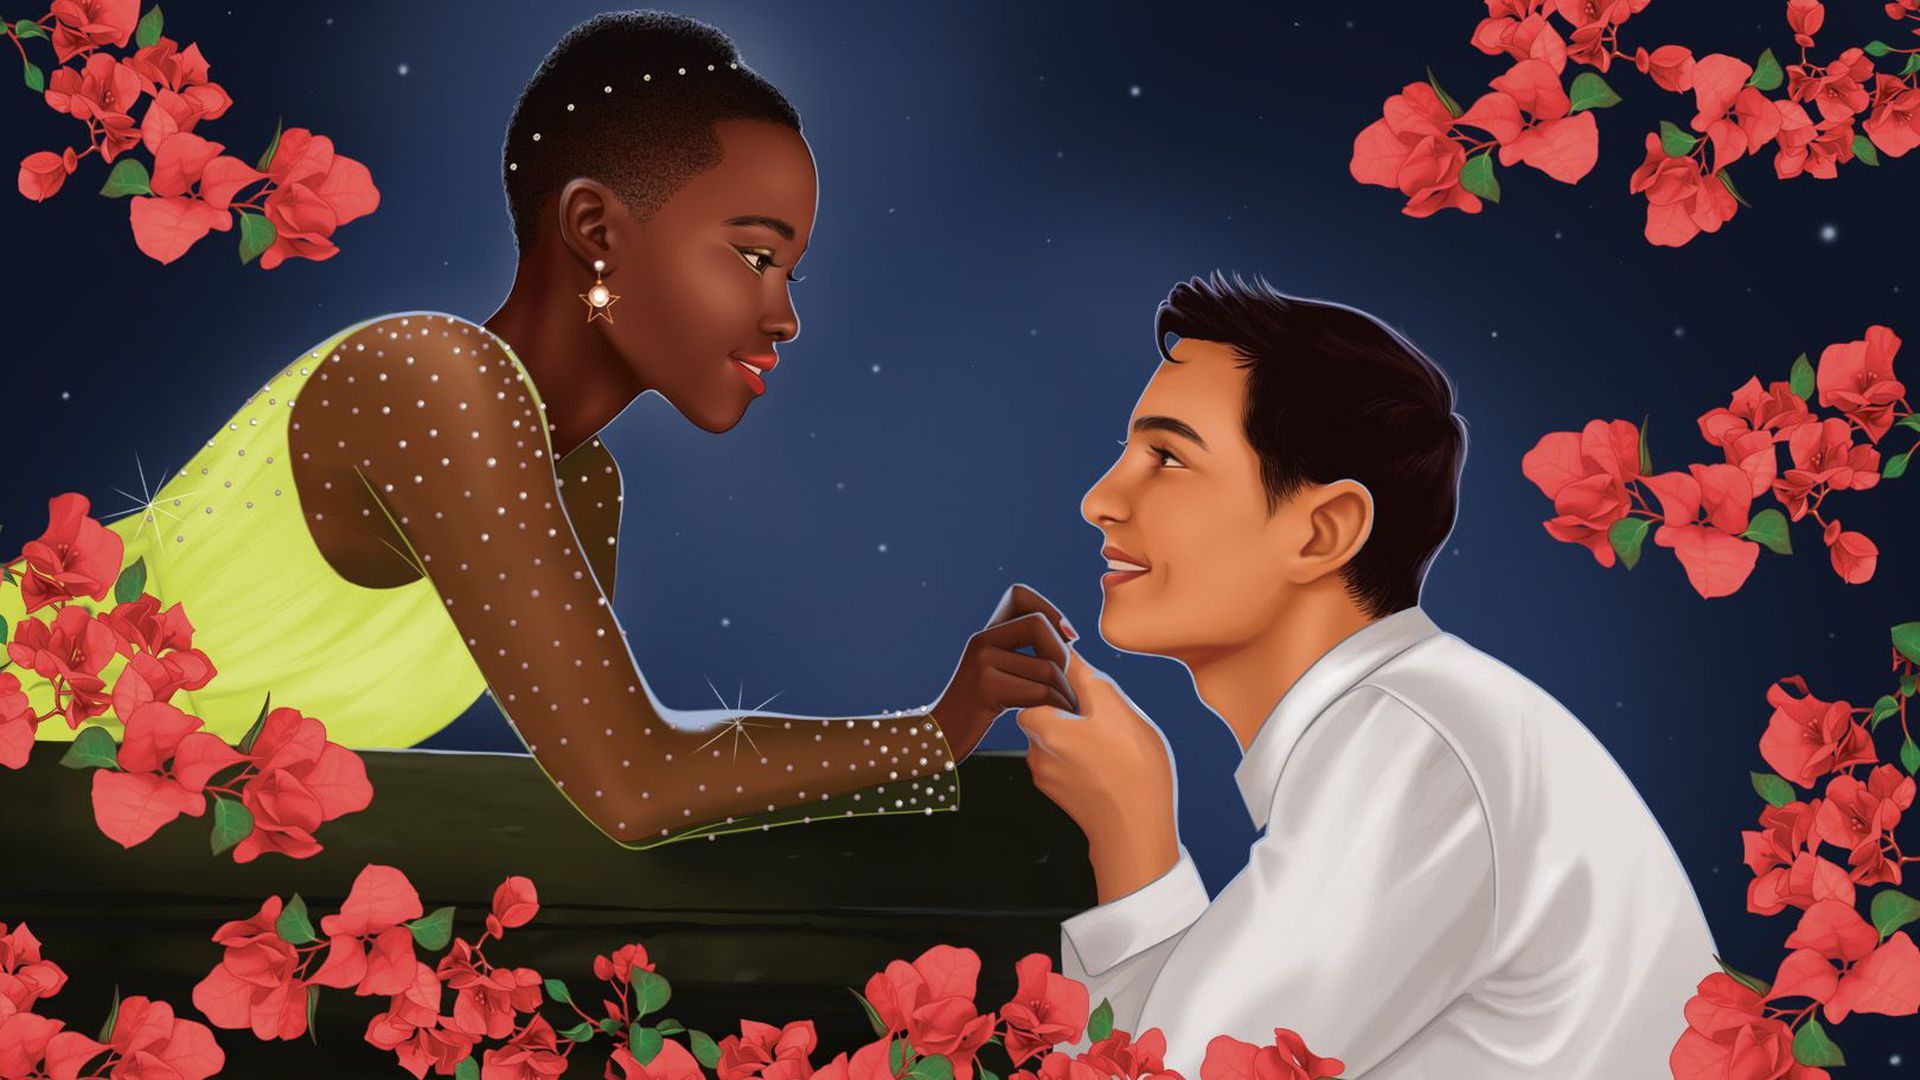 The Public Theater and WNYC Studios recently debuted a bilingual audio adaptation of "Romeo and Juliet" — "Romeo y Julieta" — starring Mexican-born Lupita Nyong’o and Colombian-born Juan Castano.